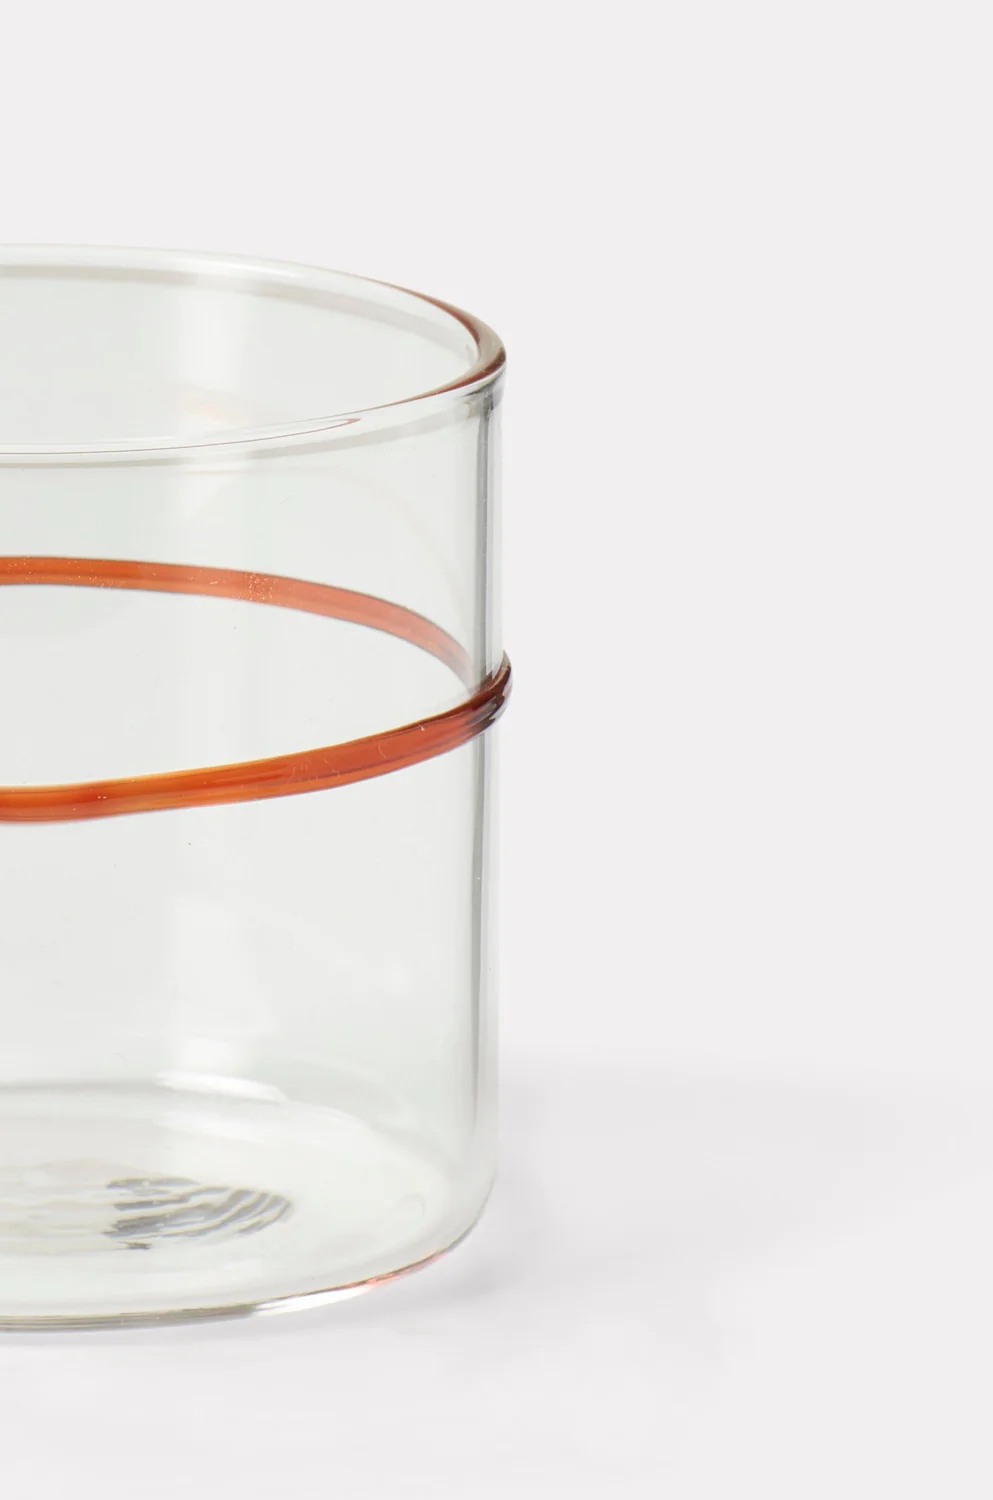 a glass cup with a brown handle on a white background